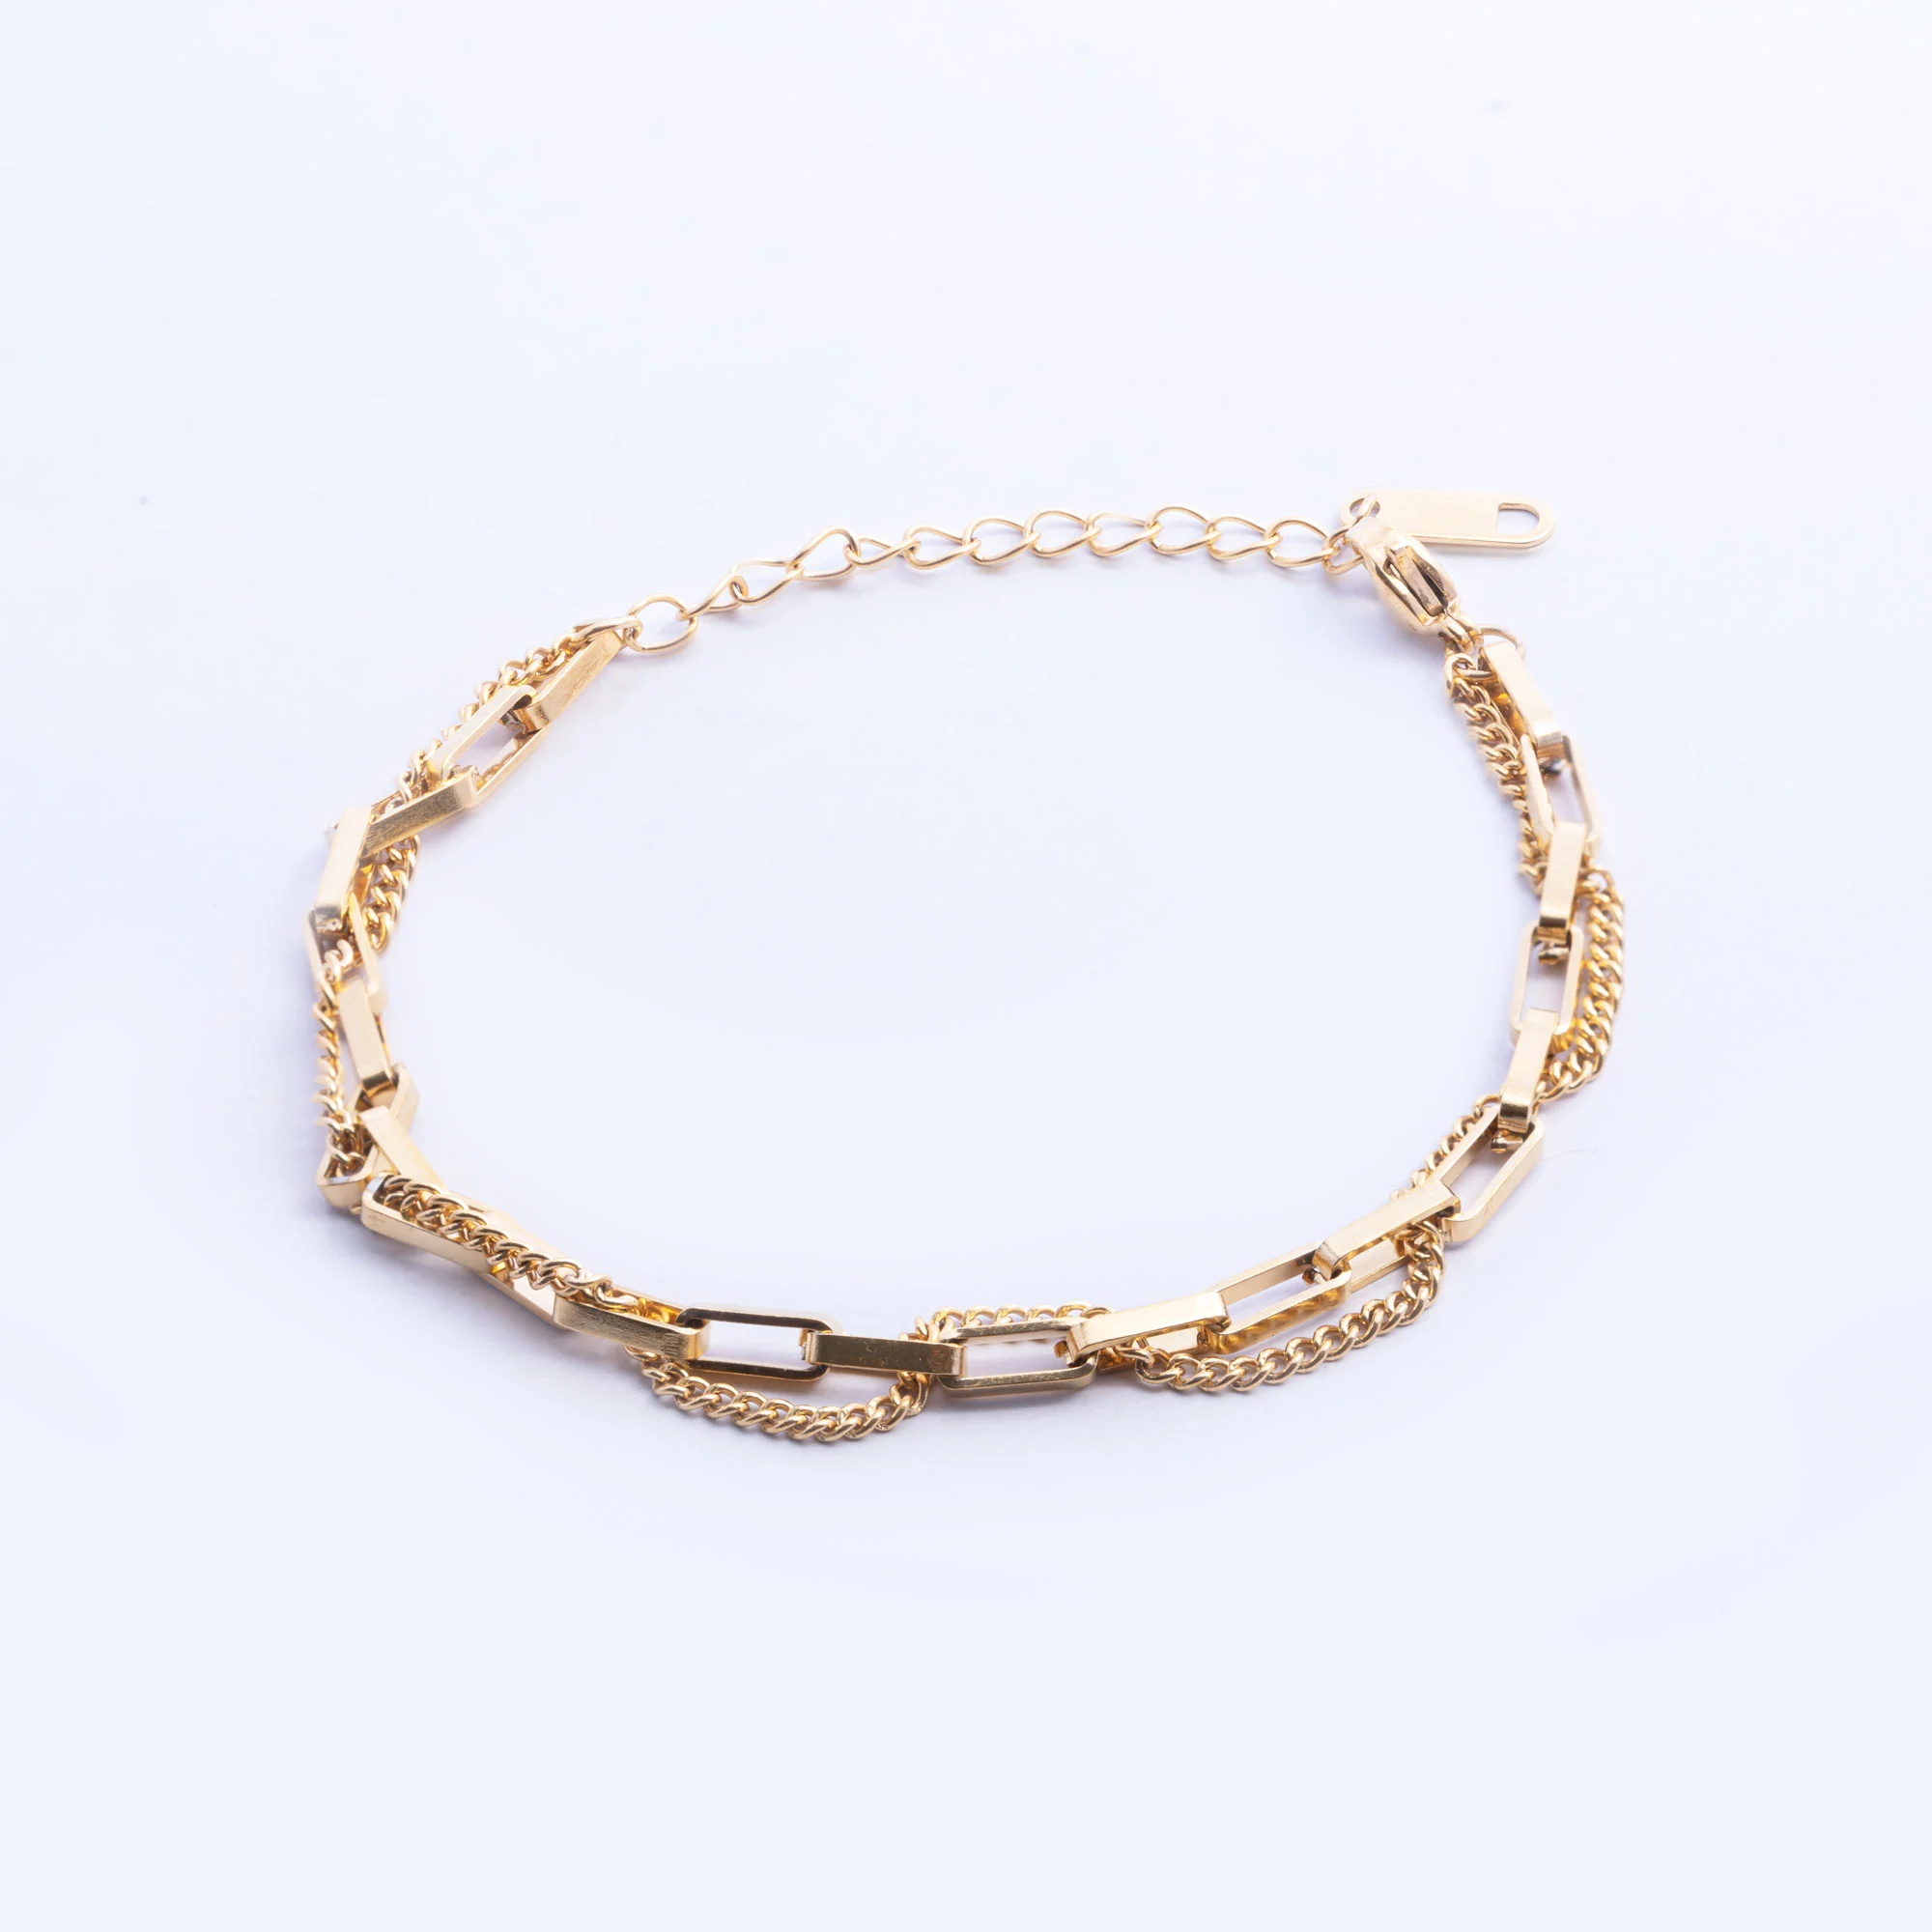 Gold Chain and Link Chain Bracelet